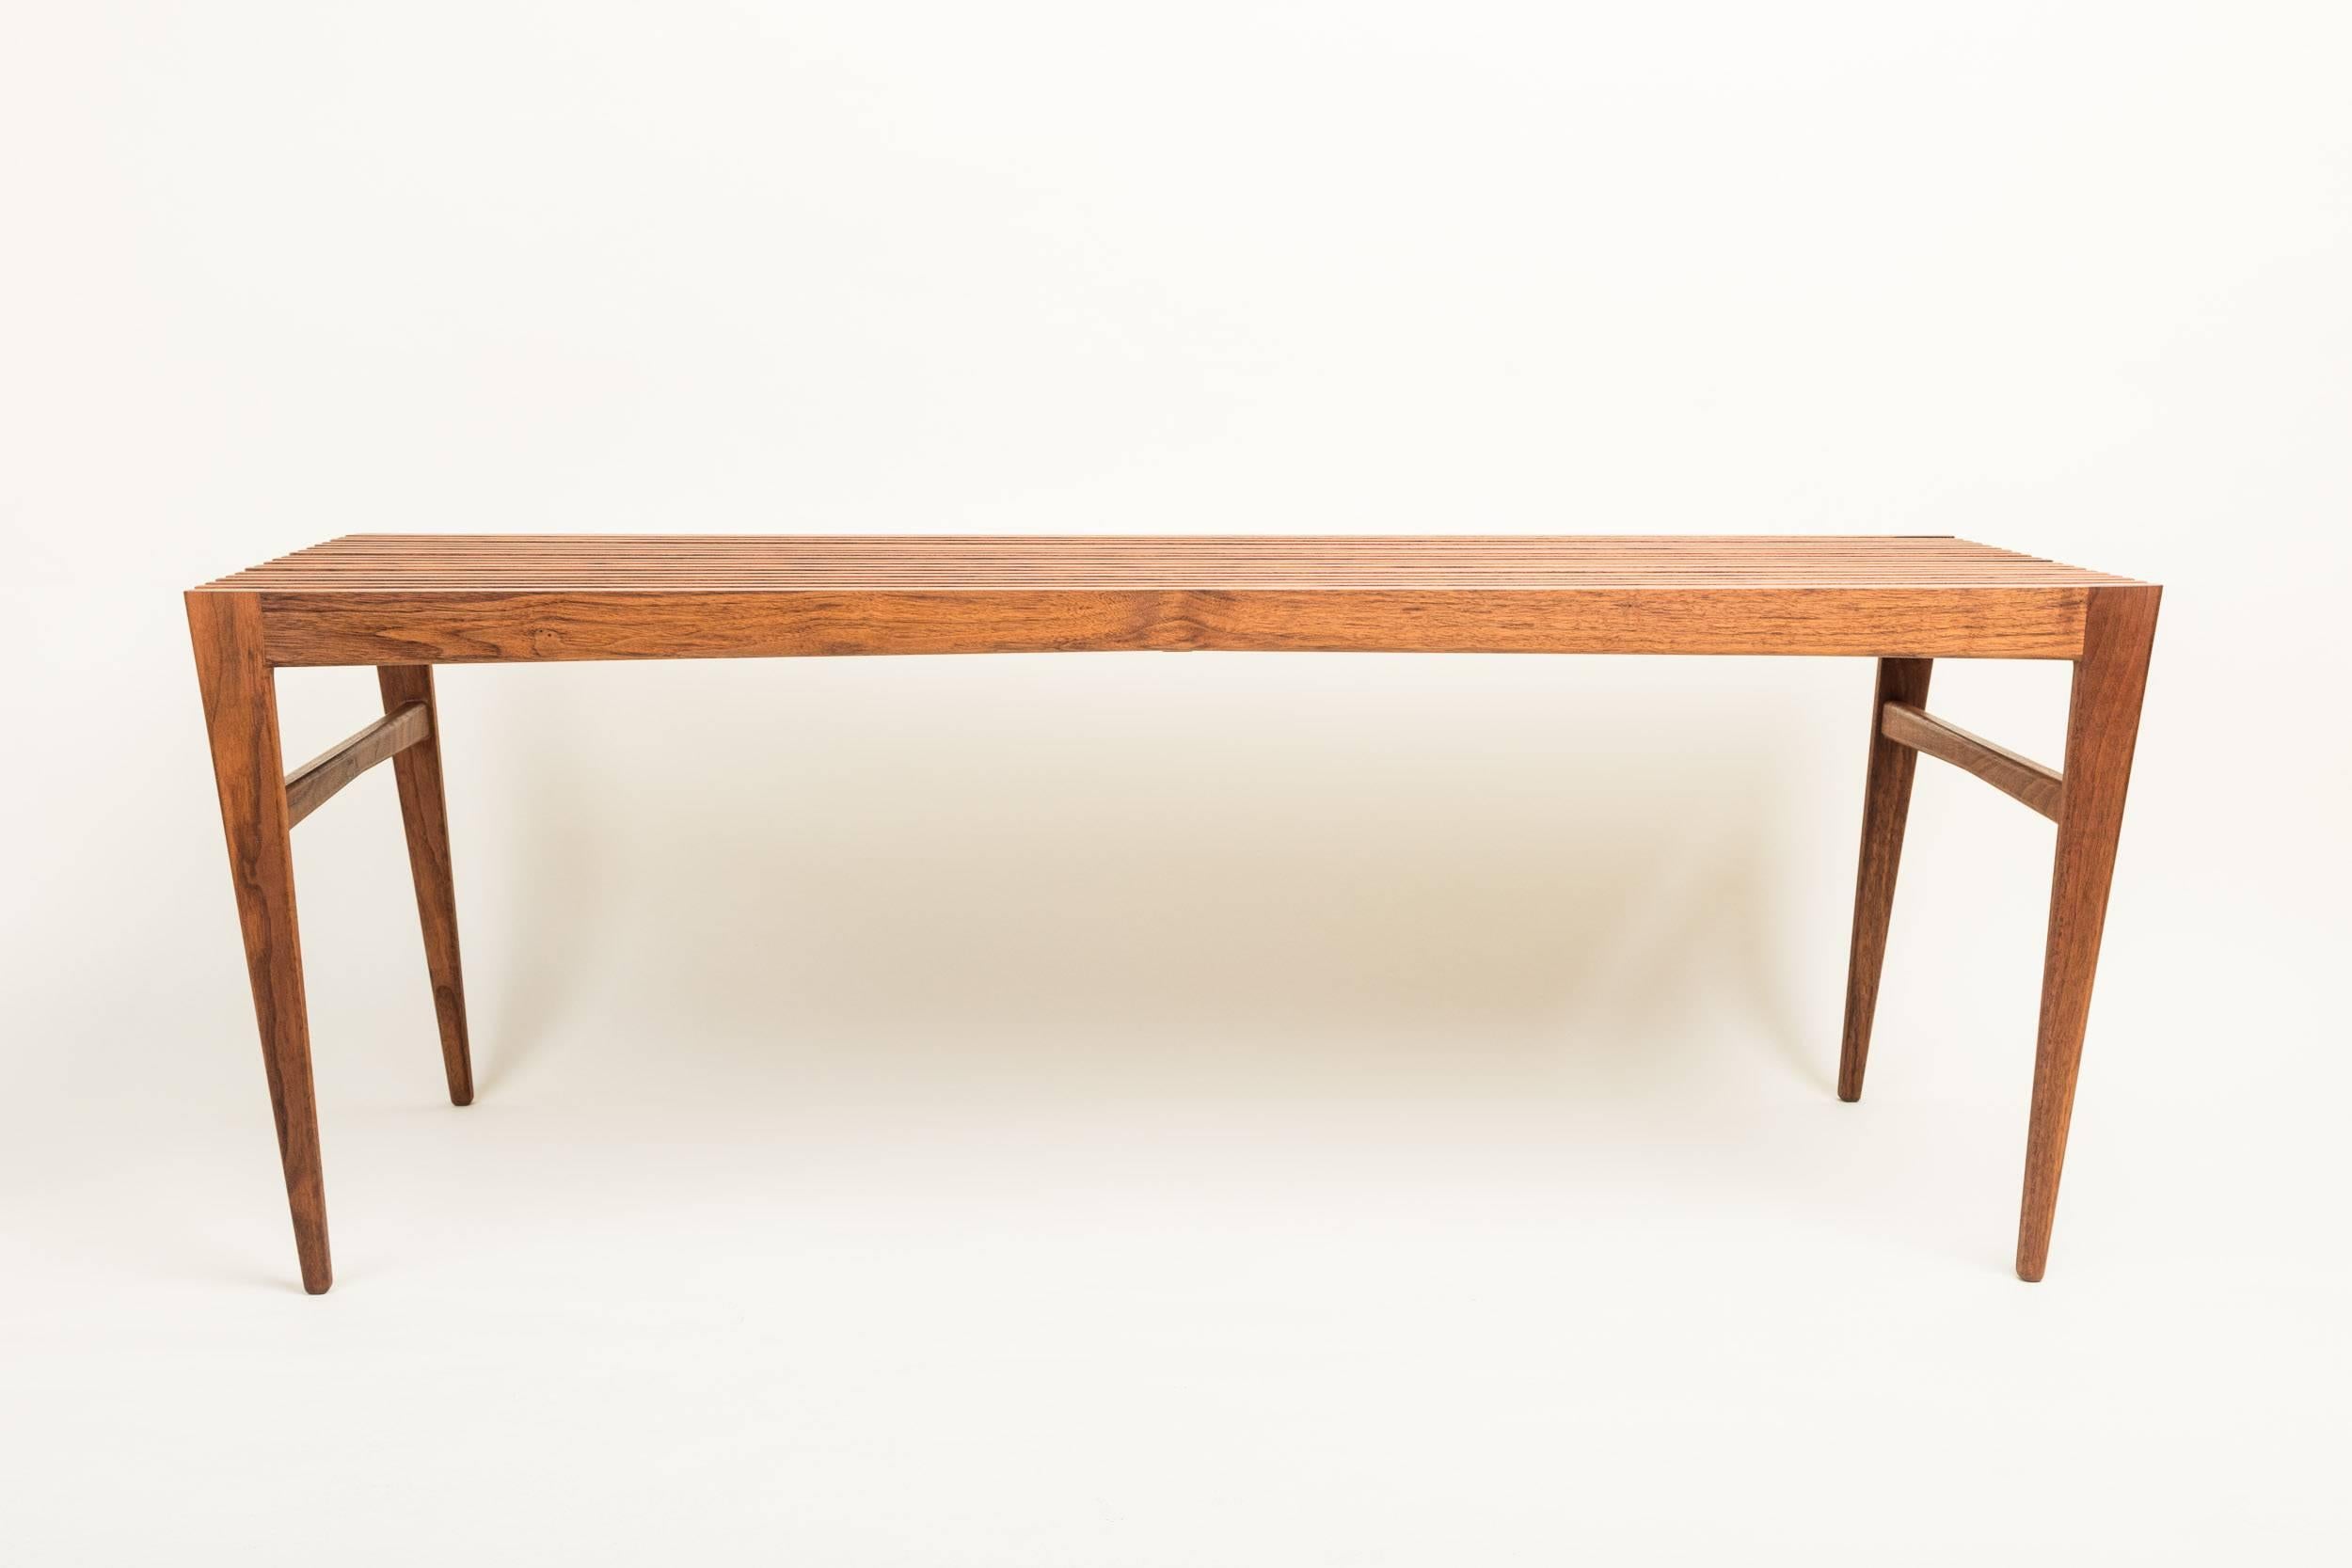 Lilian Handmade Walnut Coffee Table In New Condition For Sale In San Diego, CA